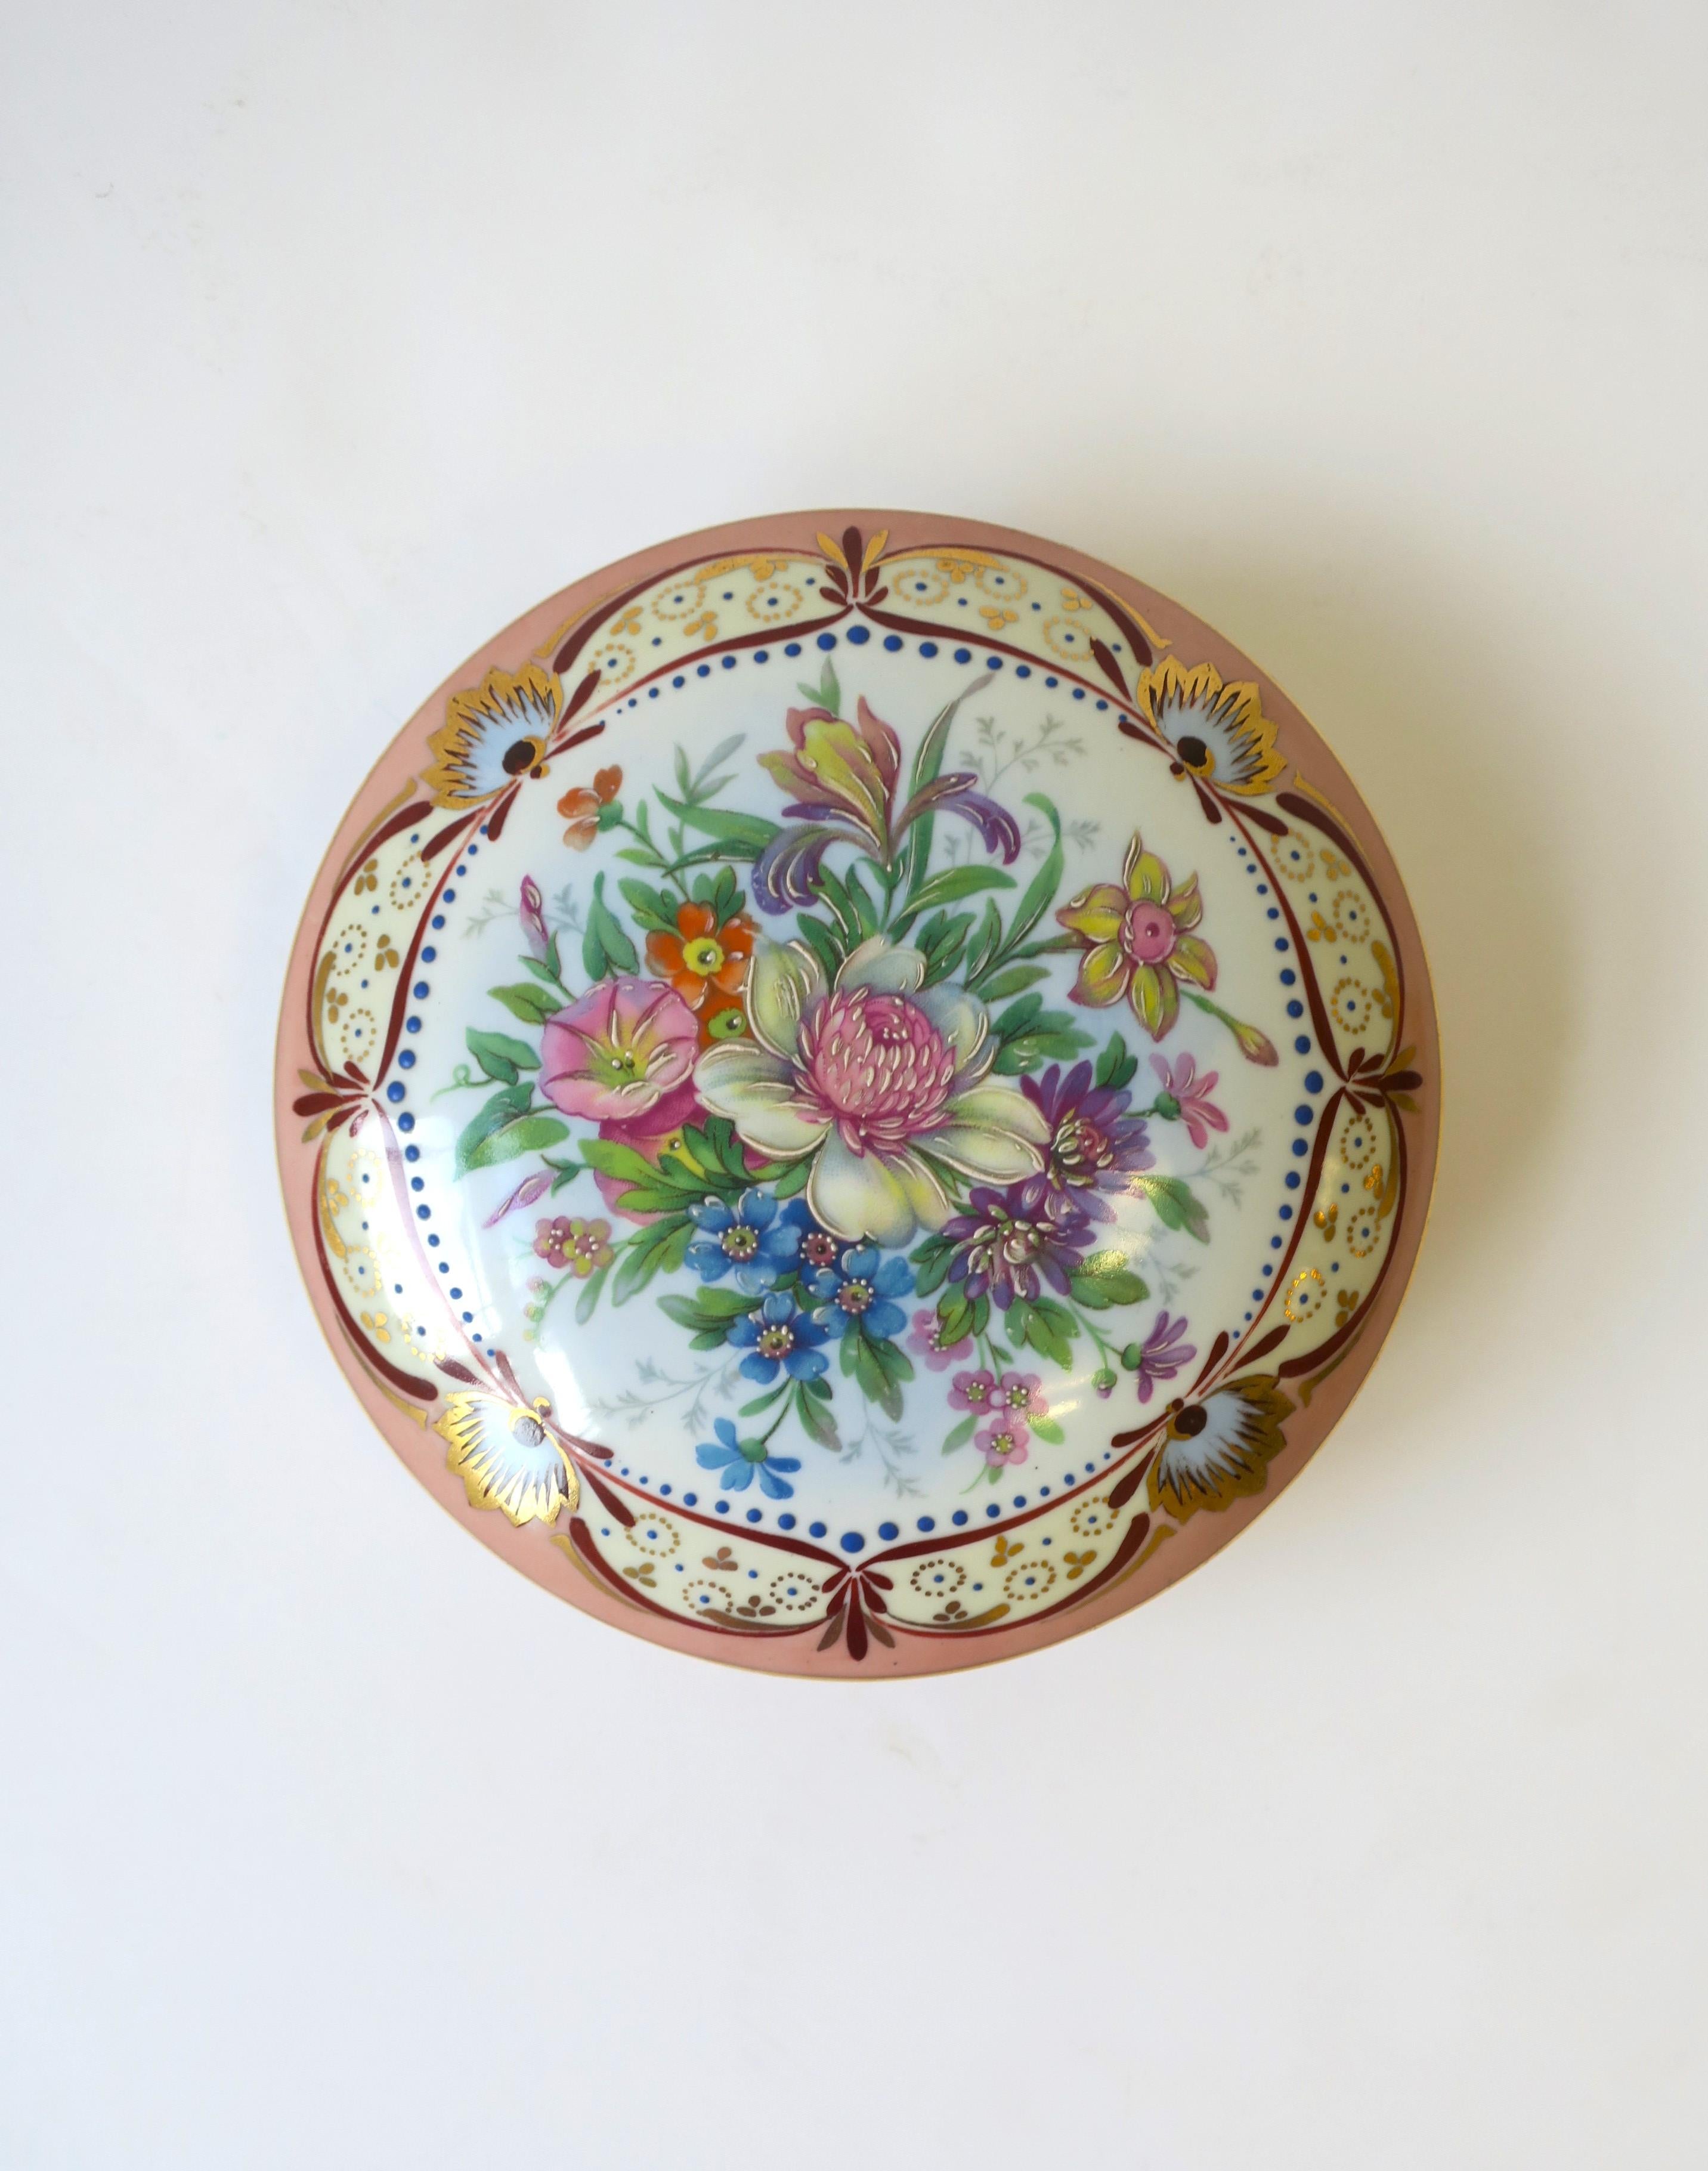 A French porcelain jewelry box with flower and leaf design and touch of gold detail, circa mid-20th century, France. A great piece for a vanity, dressing area, bathroom, etc. Marked 'France' on underside as shown in last image. Very Good condition